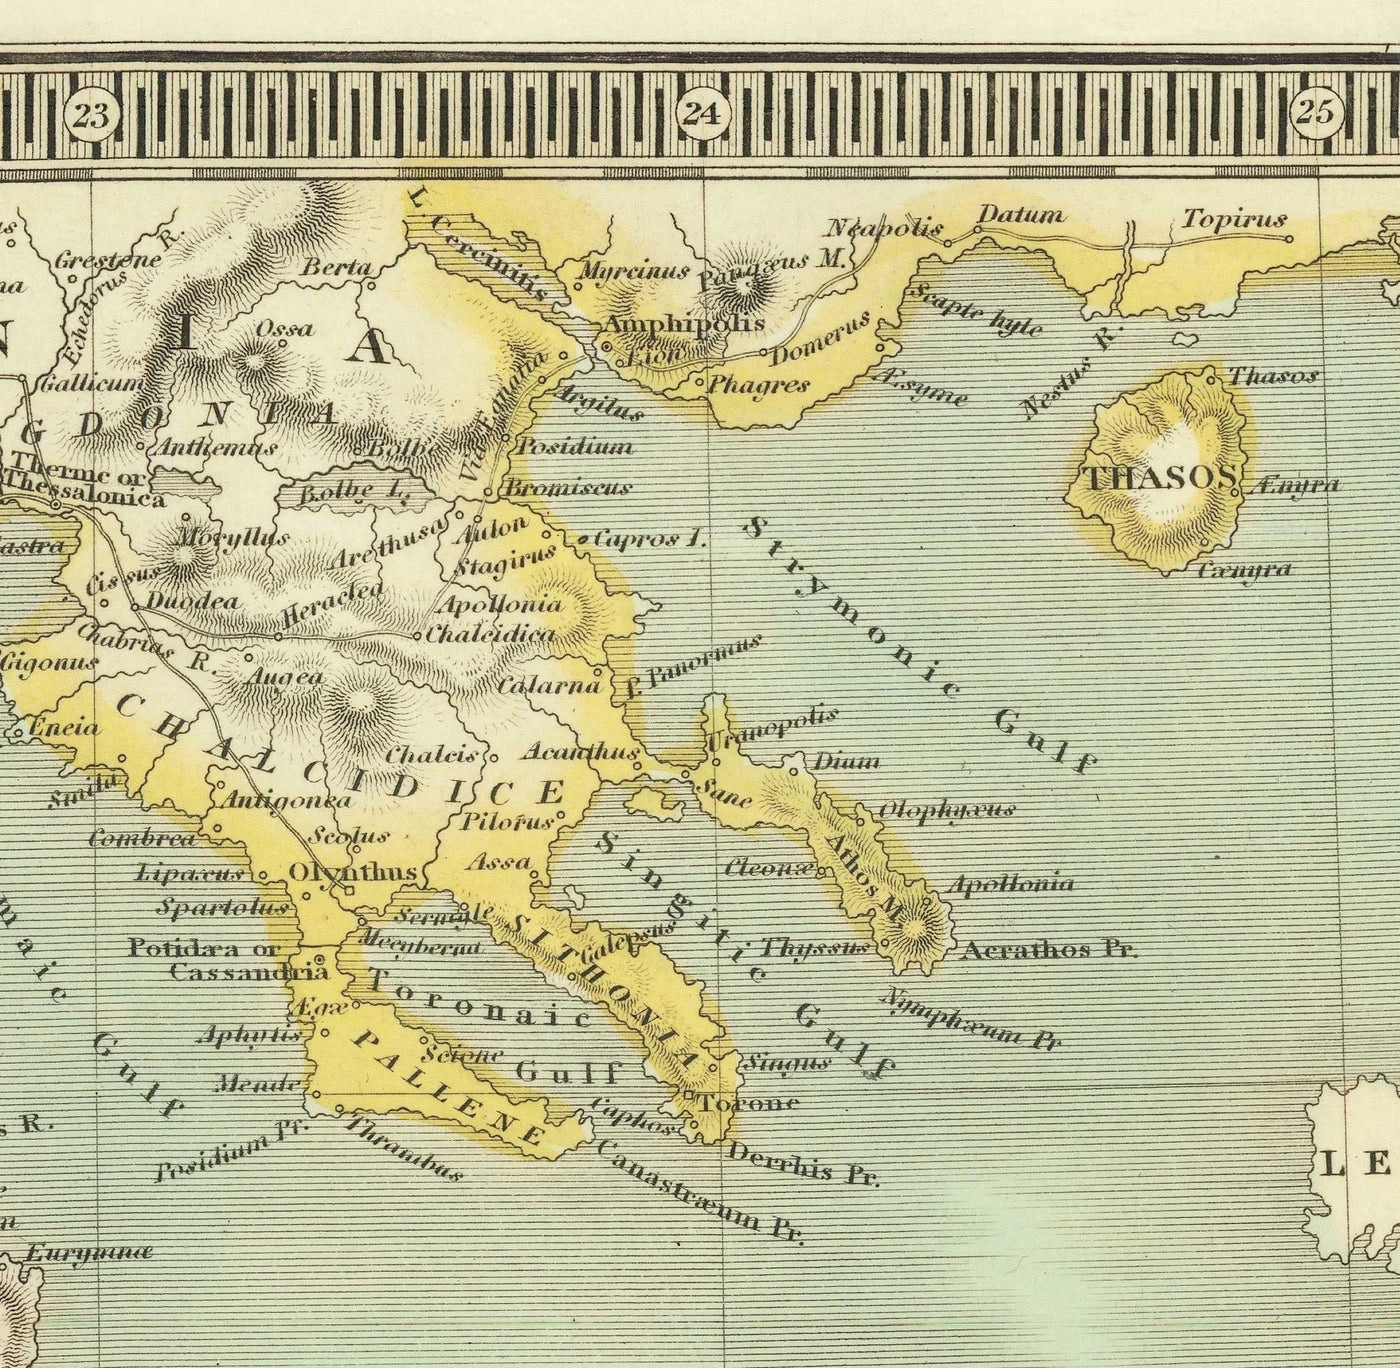 Old Map of Ancient Greece, 1834, by Teesdale - Crete, Macedonia, Corfu, Albania, Athens, Thessaly, Attica